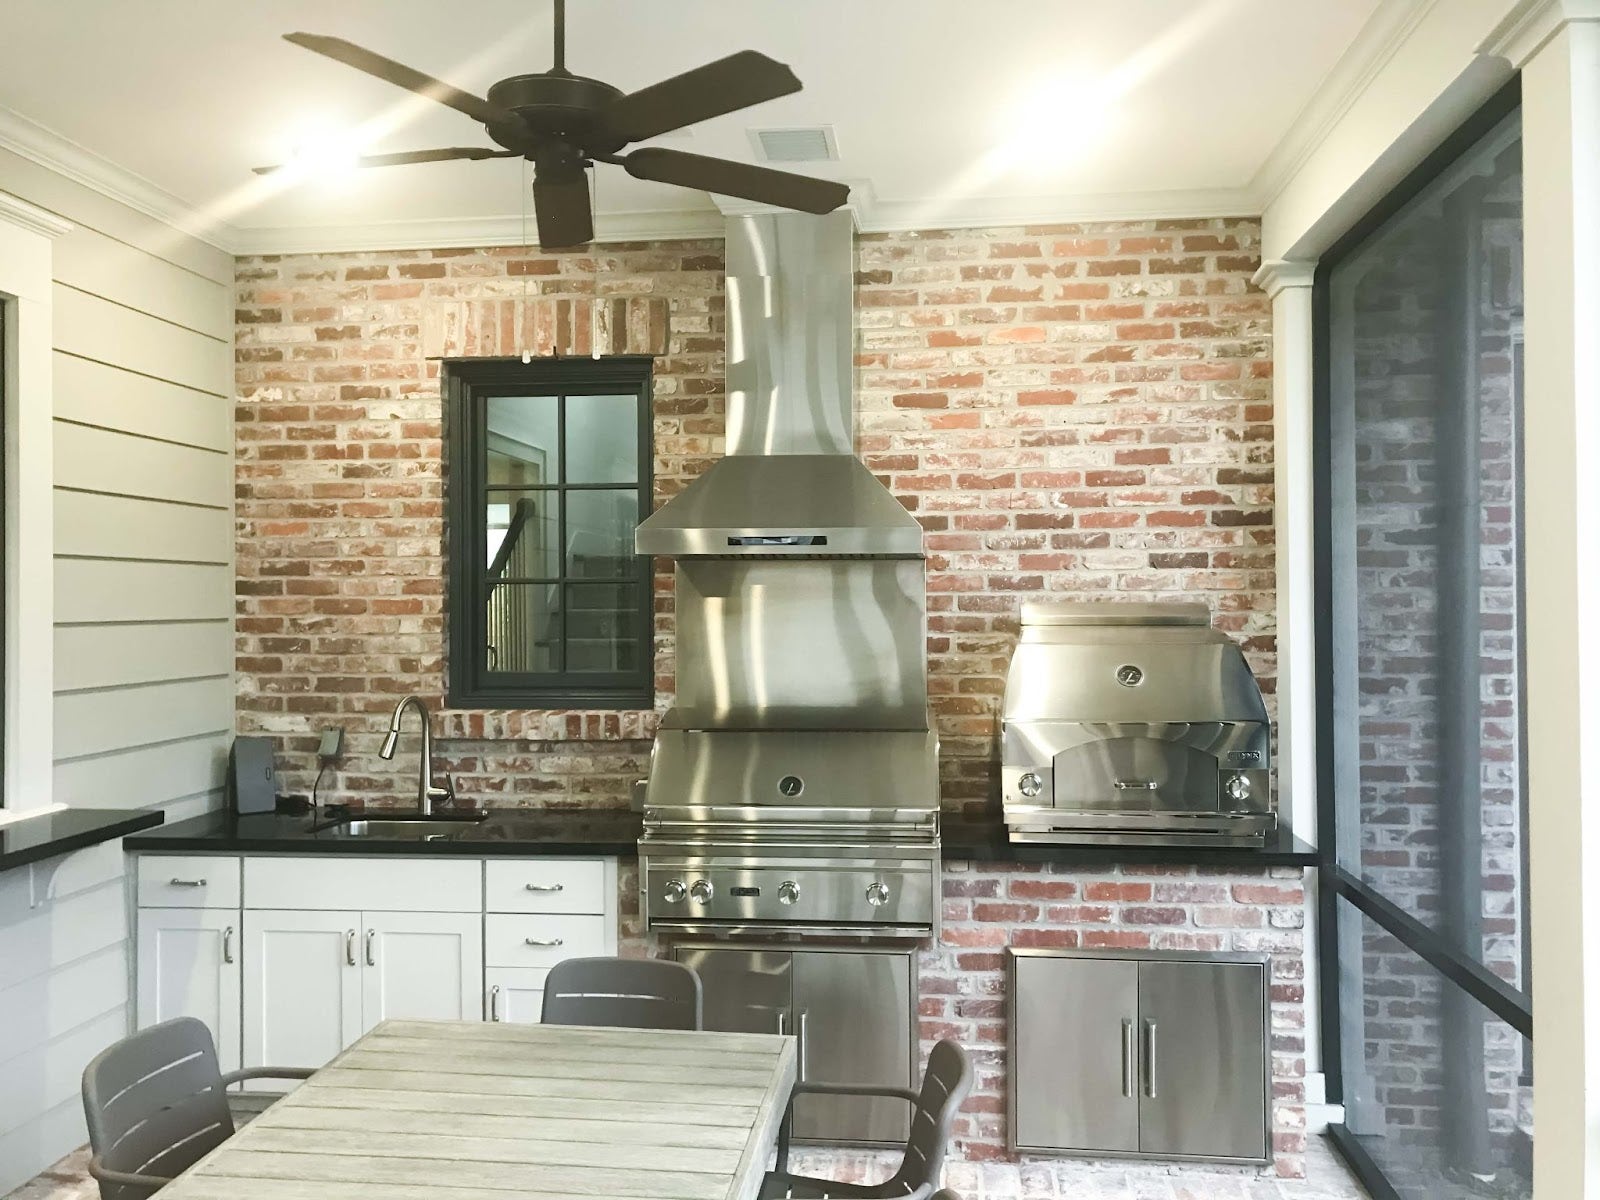 Rustic Modern Grilling Station: Exposed brick walls meet modern stainless steel range hood in this functional outdoor kitchen. The spacious grill and ample storage make it perfect for family BBQs. A ceiling fan keeps things cool, while the window offers a view of the outdoors. Perfect for creating lasting memories! - Proline Range Hoods - prolinerangehoods.com 